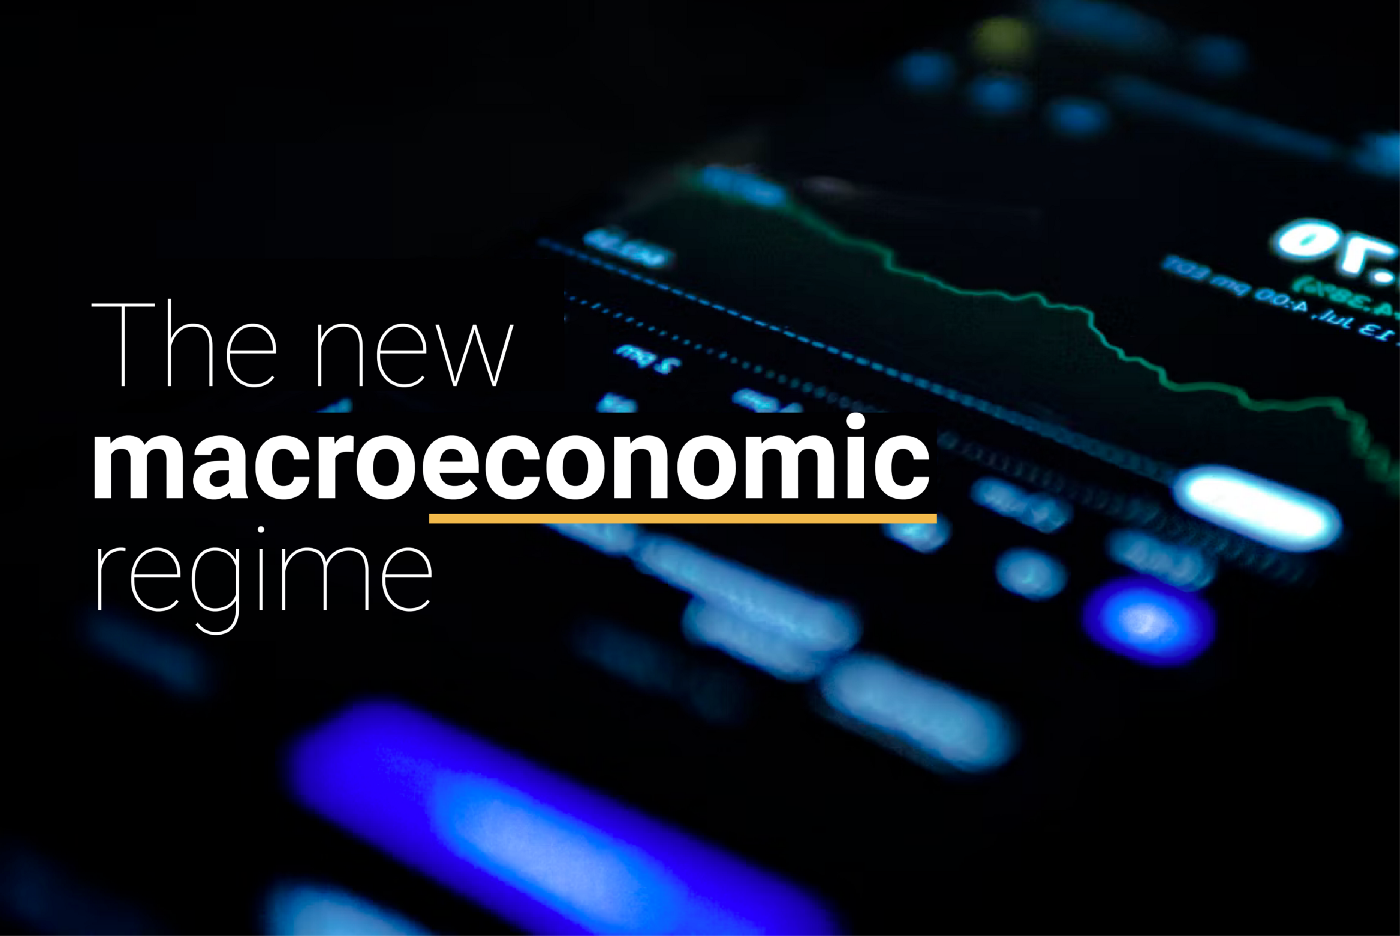 A new macroeconomic regime — what does it mean for venture?